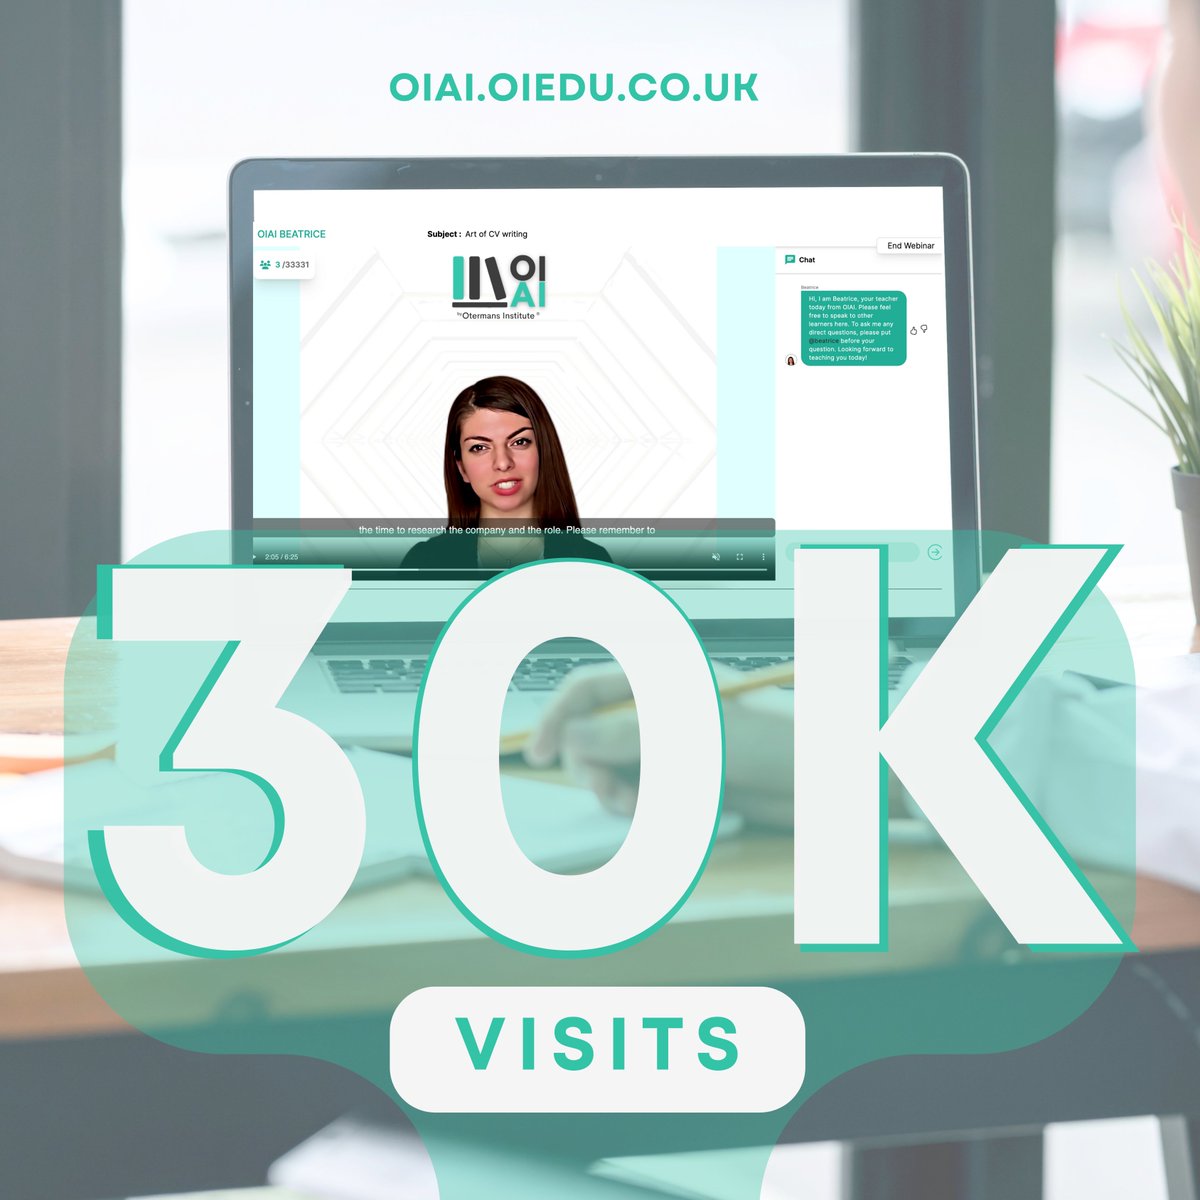 To be more precise, the first lesson of our AI Teacher - Beatrice was watched by 33.331 visitors in less than 72 hours! If you are curious to learn more, visit her class following this link: oiai.oiedu.co.uk

#AI #upskillingageneration #tech #EducationUpdates